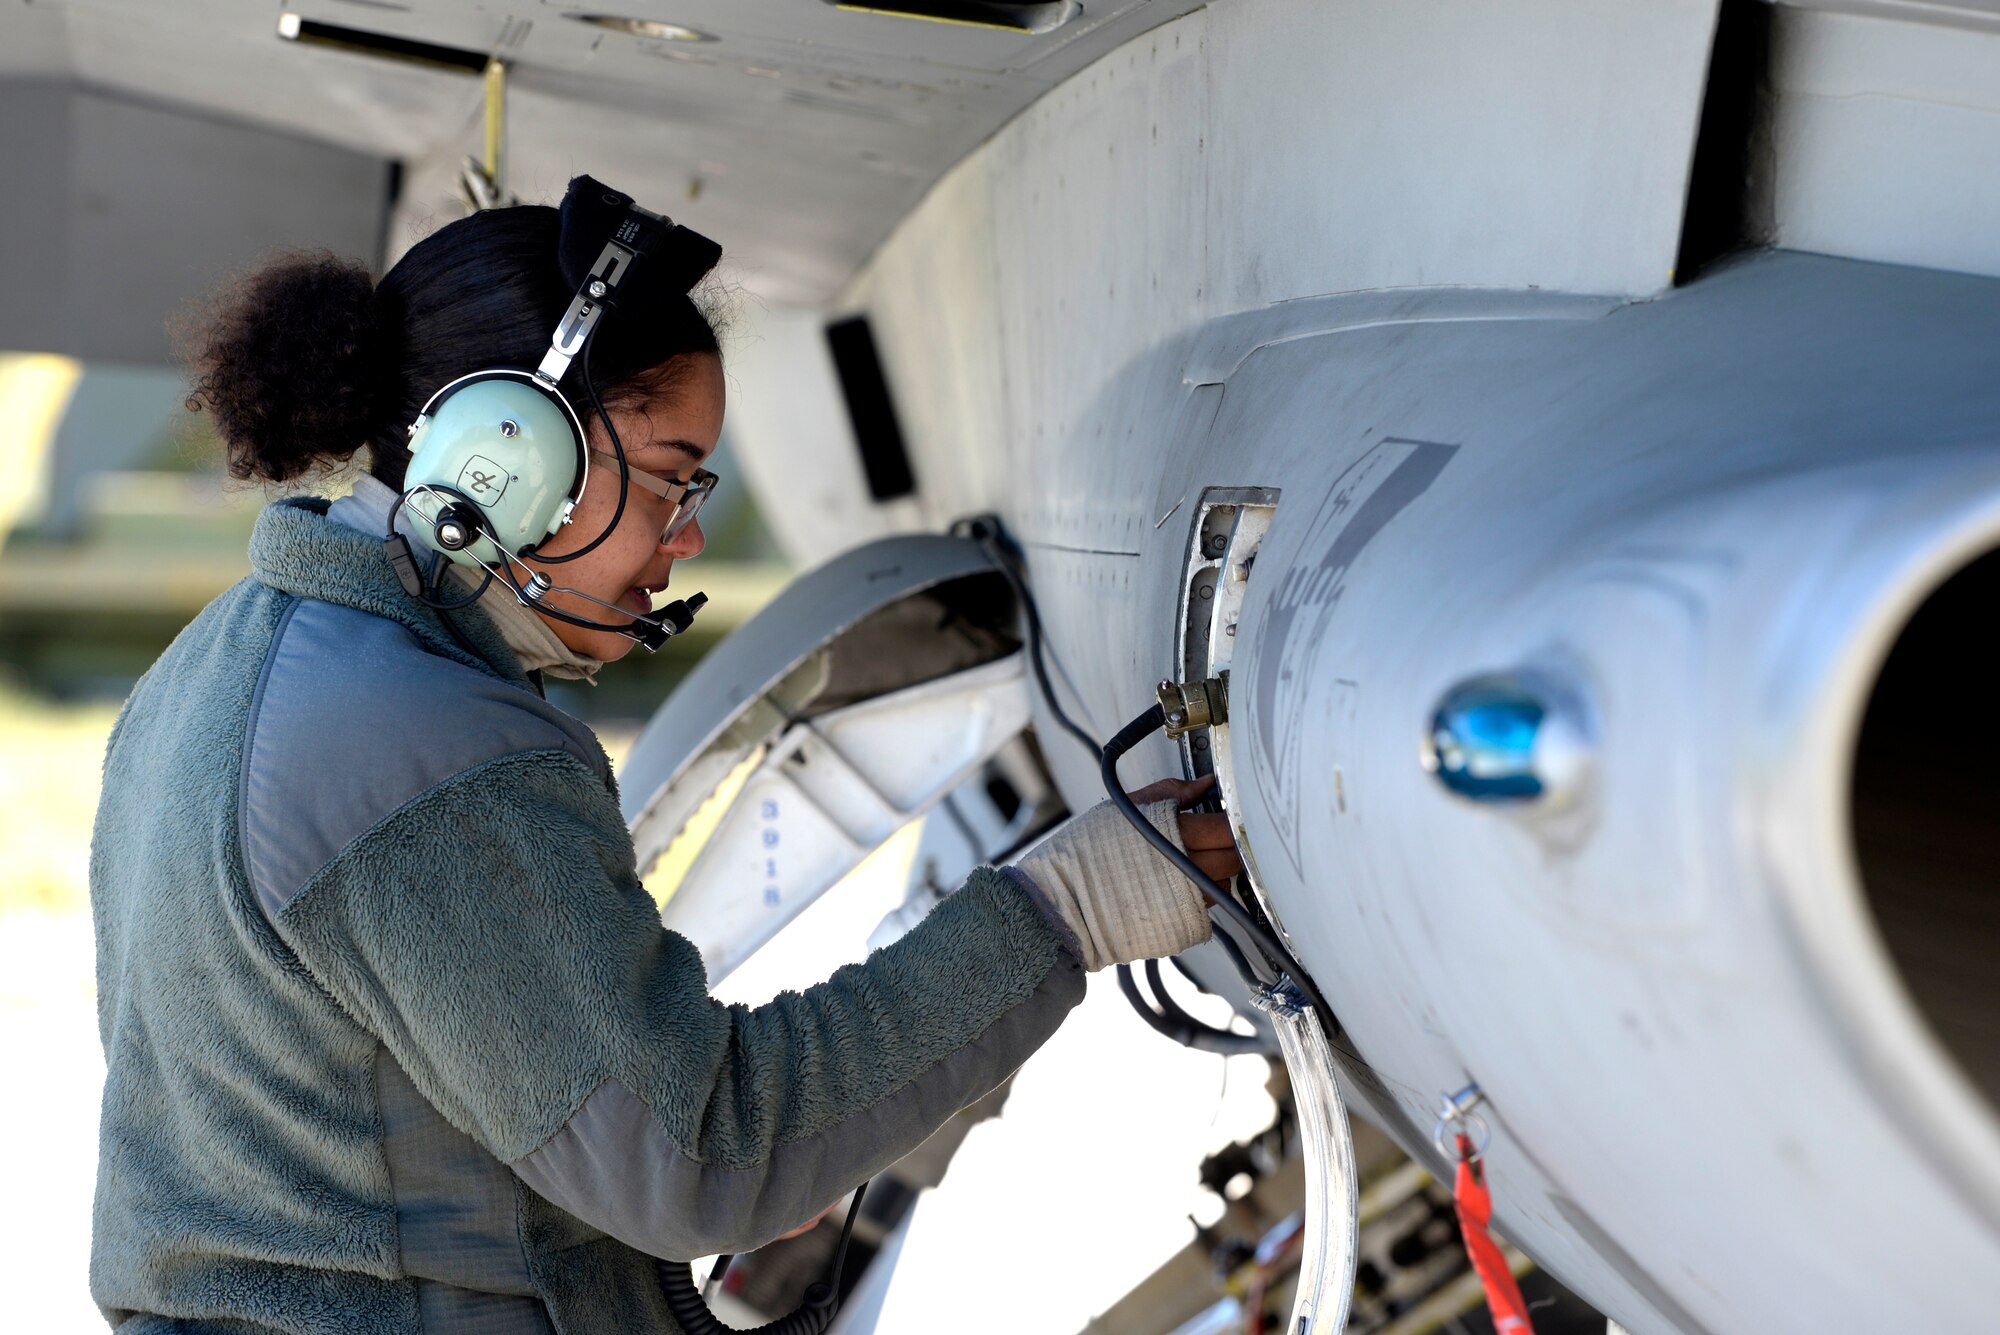 U.S. Air Force Staff Sgt. Reina Baker, 52nd Aircraft Maintenance Squadron F-16 Fighting Falcon dedicated crew chief, conducts F-16 Fighting Falcon ground communication equipment checks at RAF Lossiemouth, Scotland, May 7, 2019, during exercise Formidable Shield. The 52nd Fighter Wing, Spangdahlem Air Base, Germany, deployed F-16s and support personnel to support the U.S.-led exercise, conducted by Naval Striking and Support Forces NATO. The purpose of the training is to improve allied interoperability in a live-fire integrated air and missile defense exercise. (U.S. Air Force photo by Master Sgt. Austin M. May)